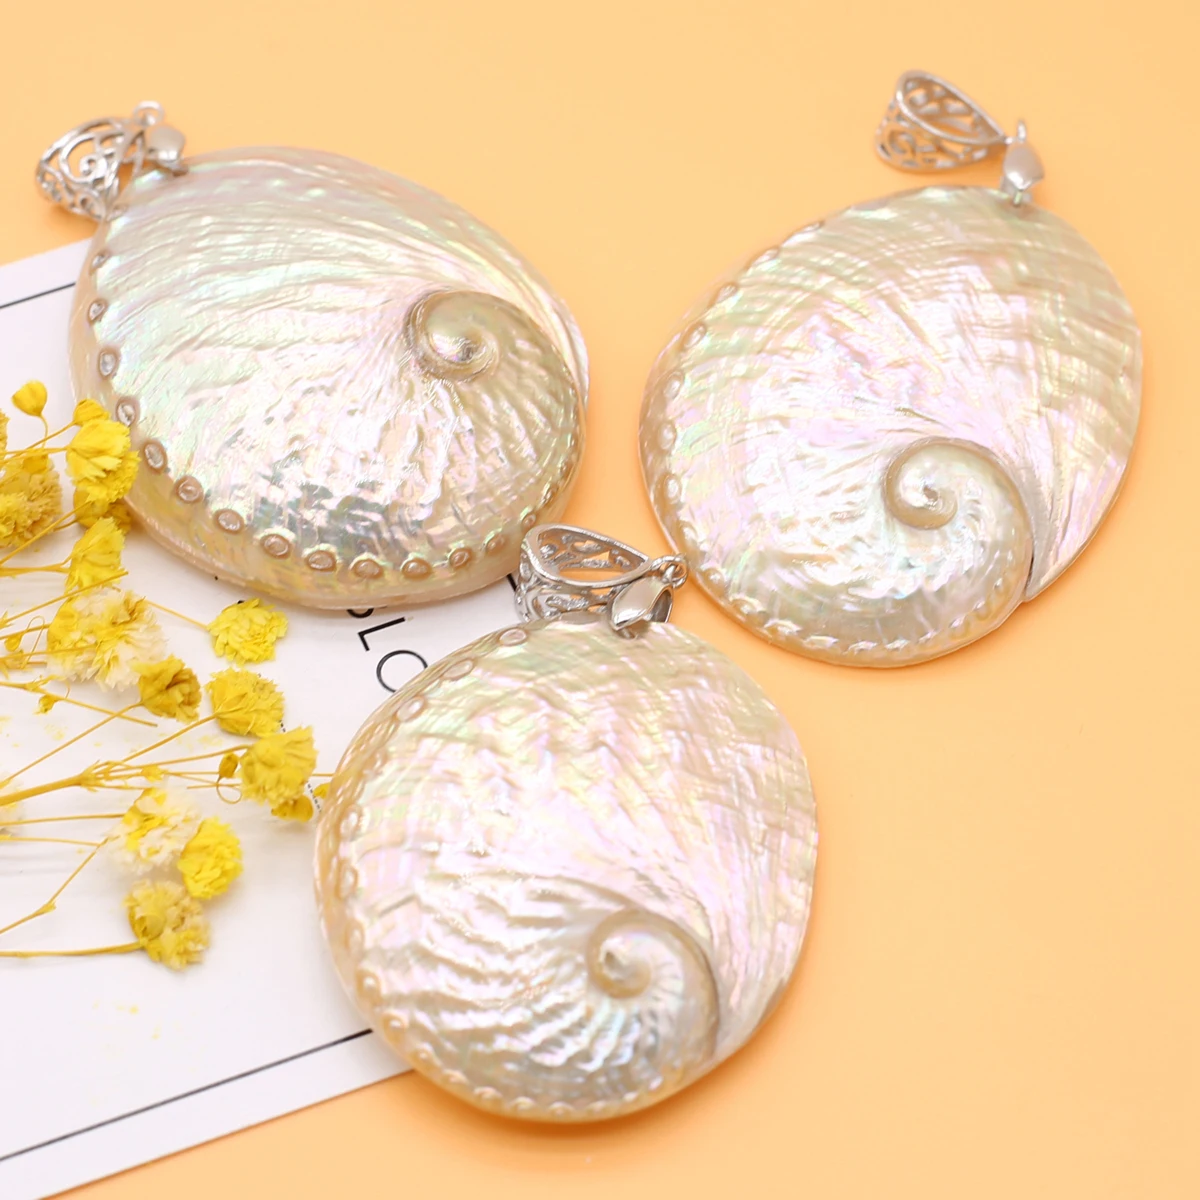 

Natural White Mother of Pearl Shell Pendants Charm Round Necklace Pendant Women Jewelry Gift Making Supplies 3.5x5cm-4x6cm